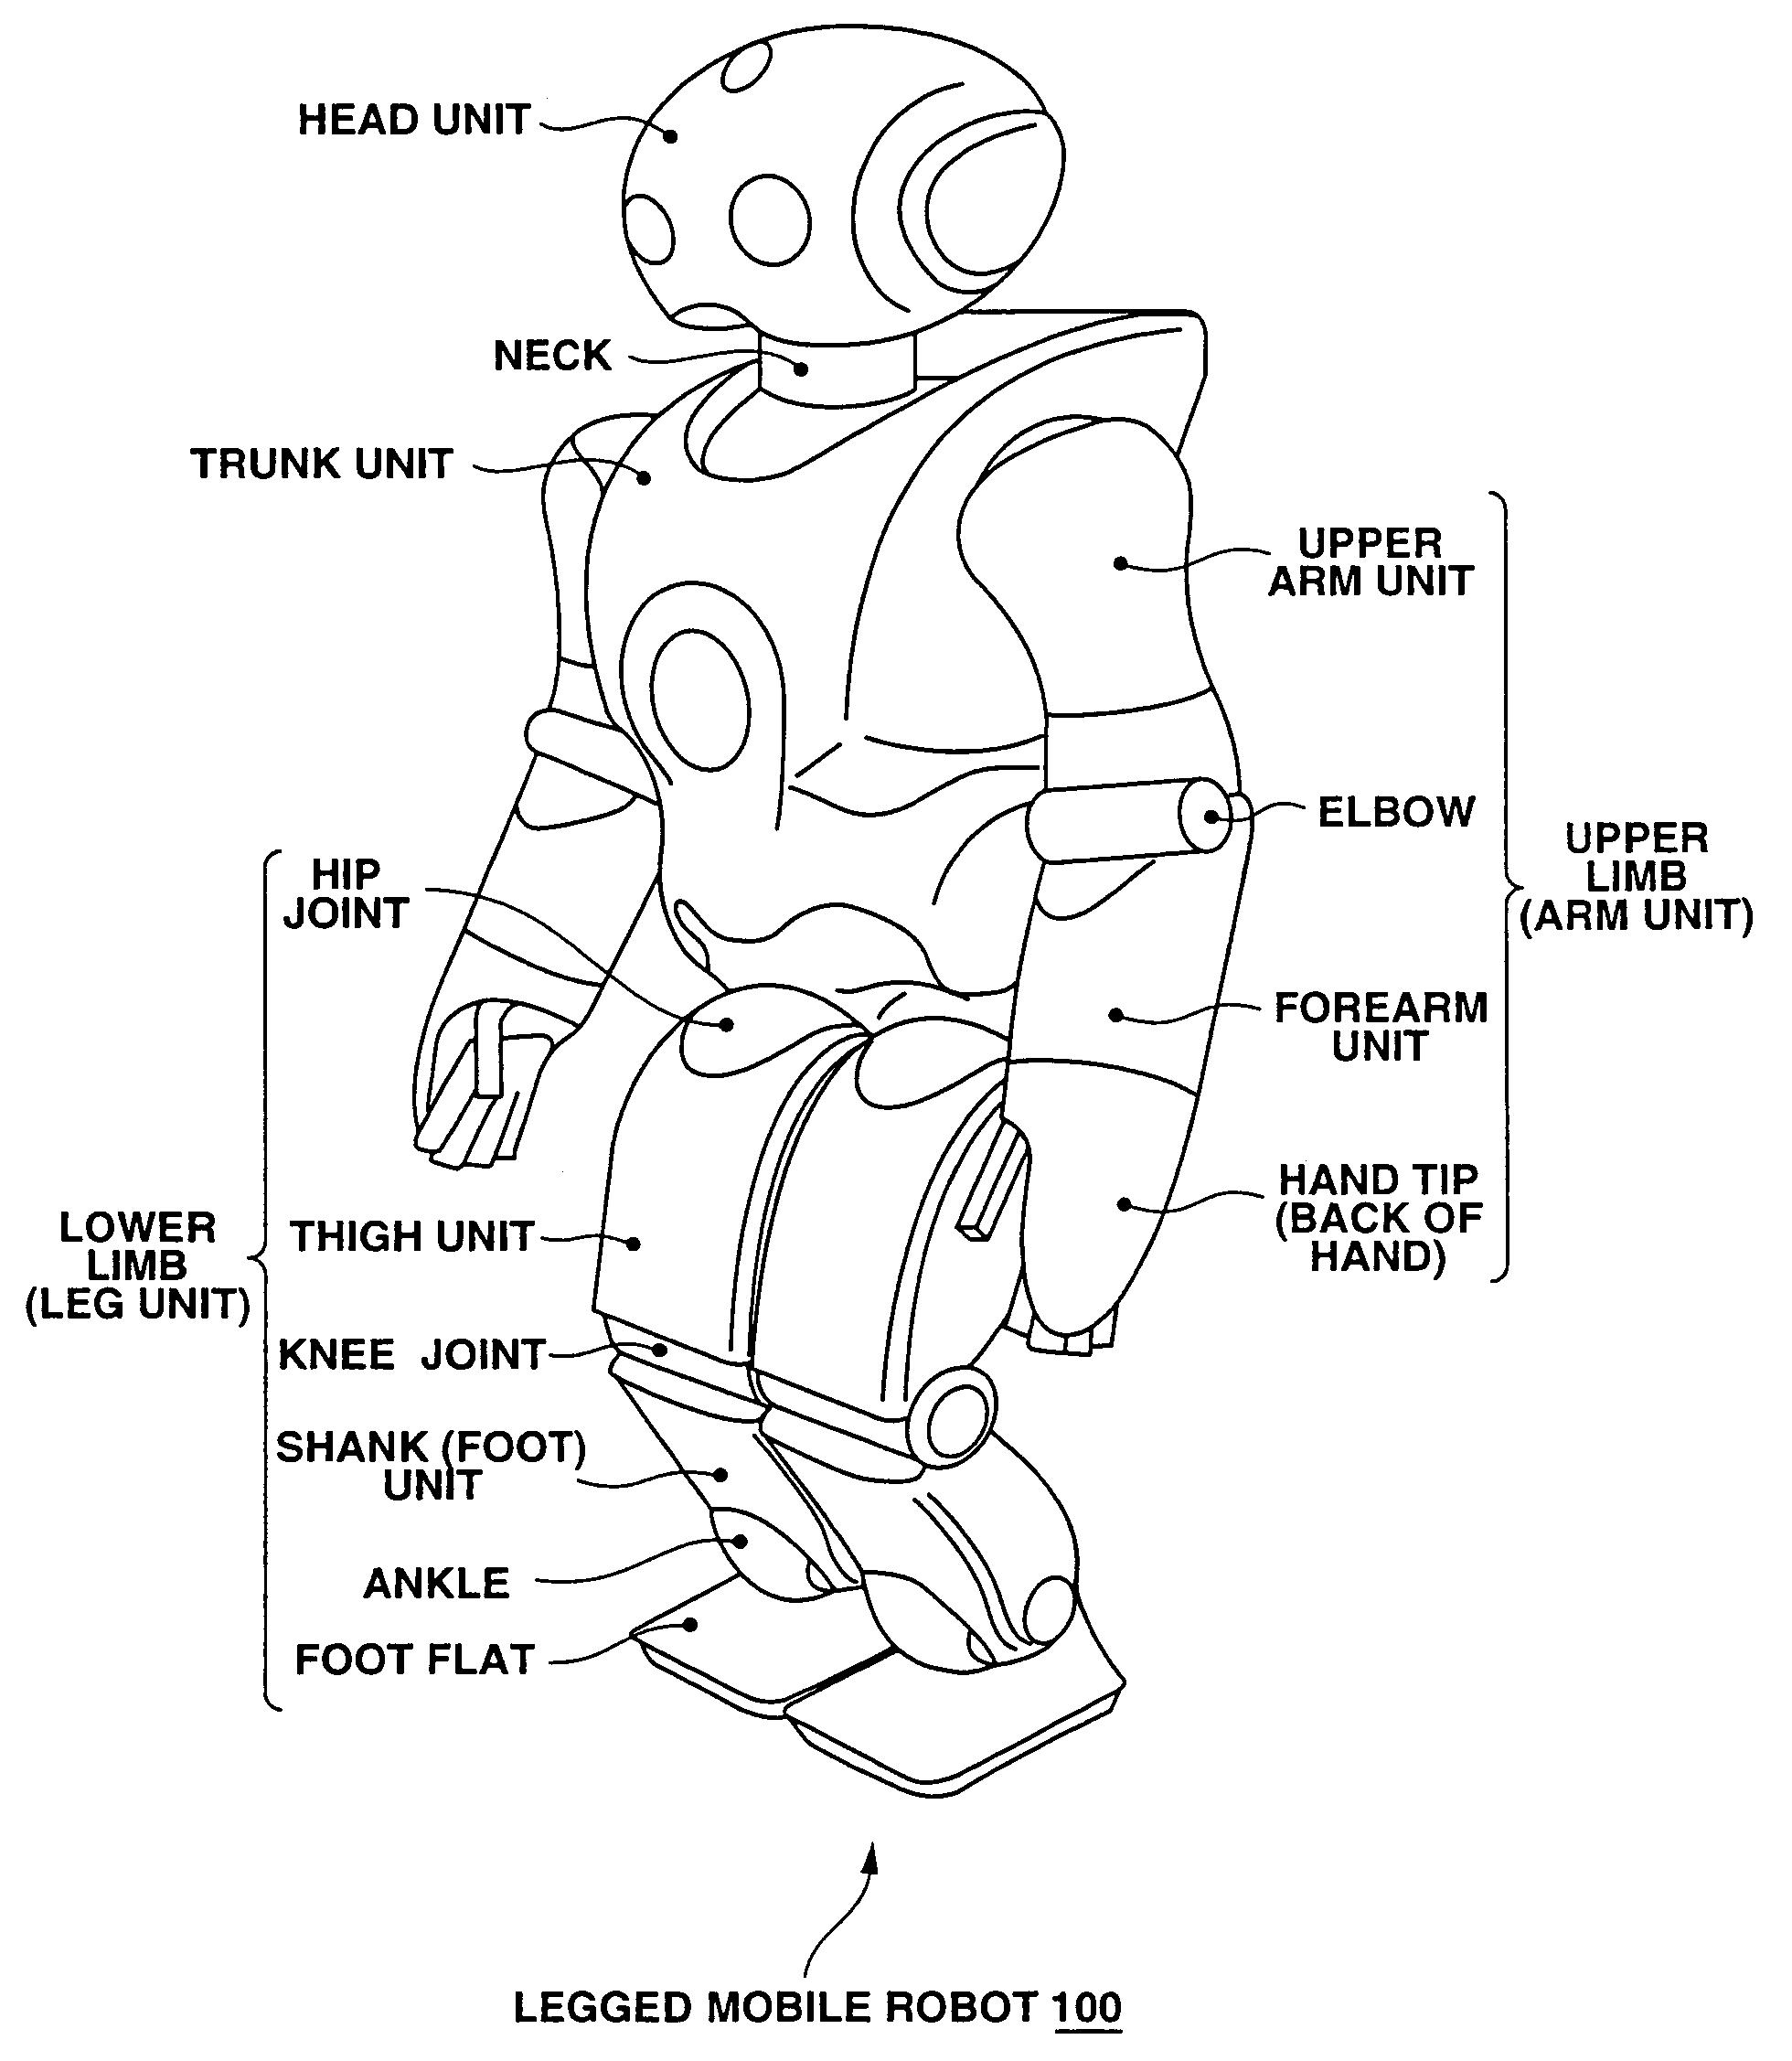 Motion editing apparatus and method for legged mobile robot and computer program